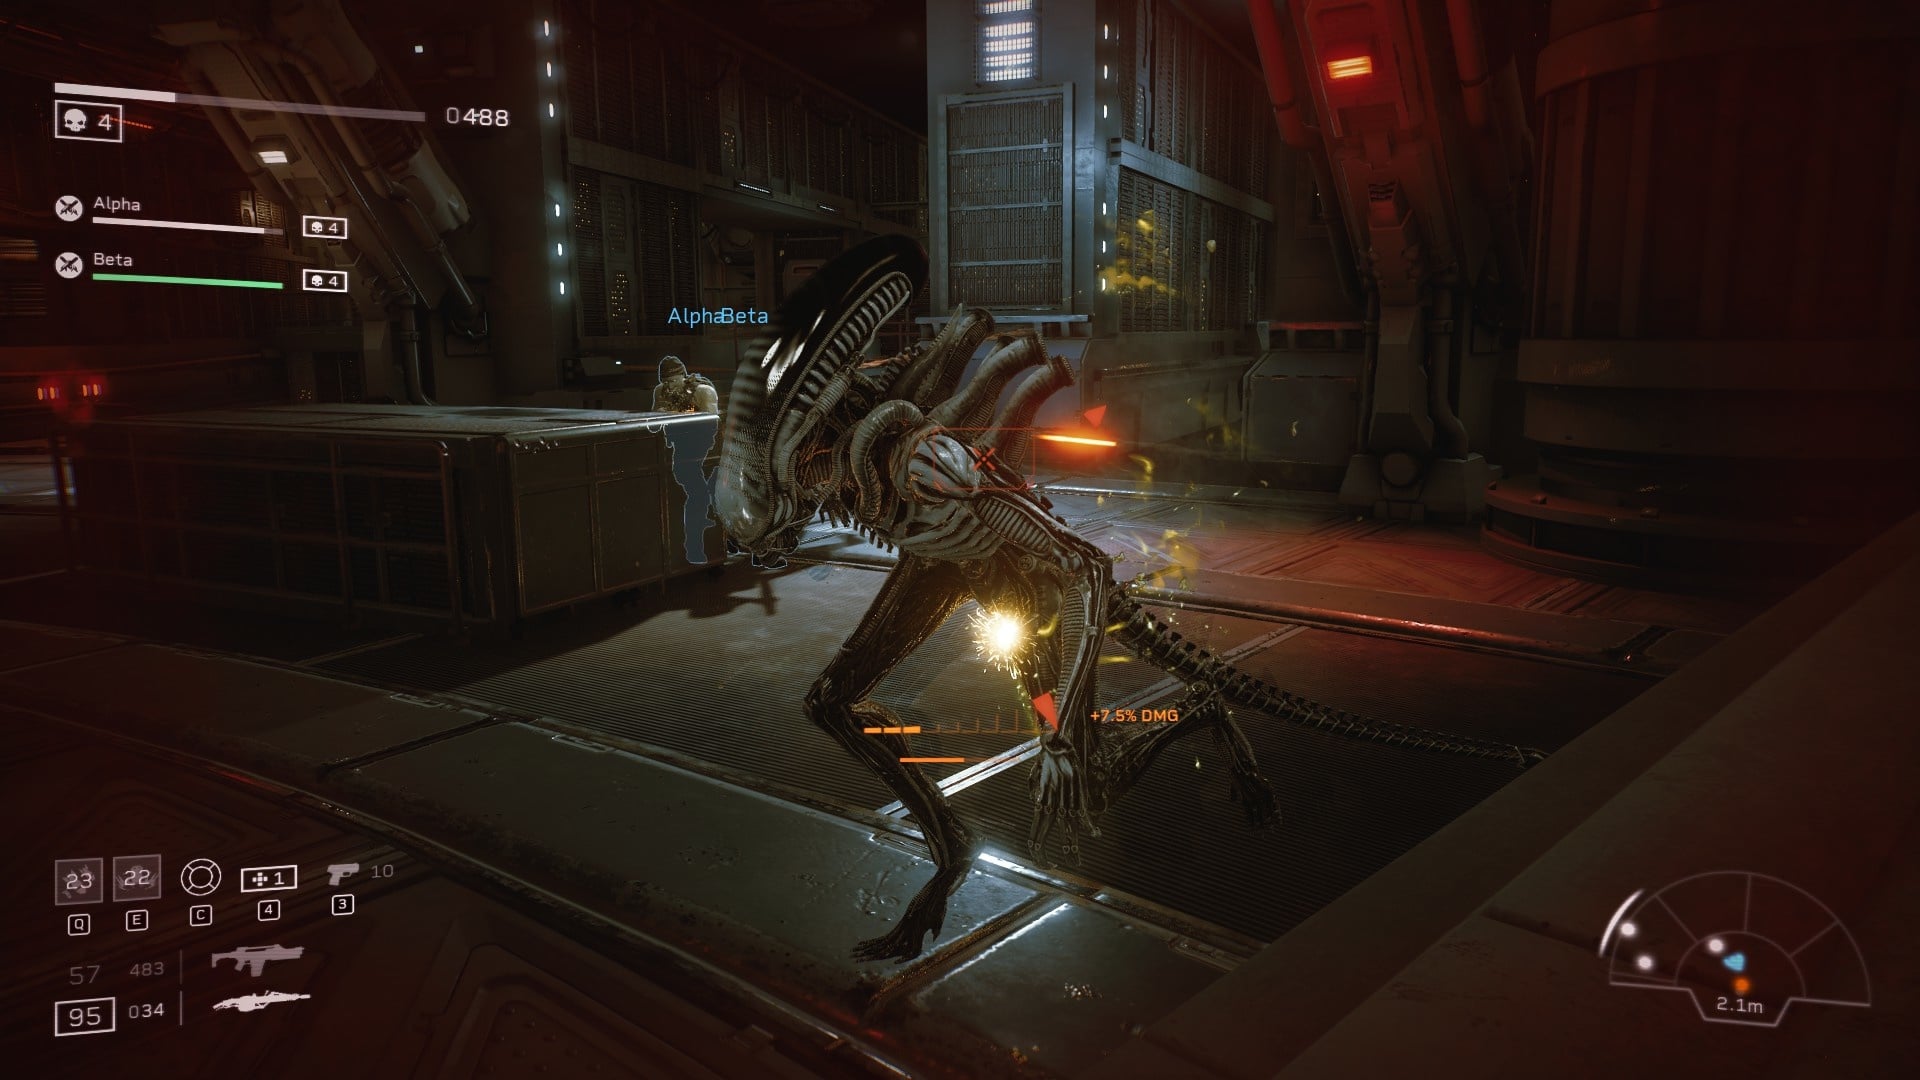 This particular alien has a bit of a backstory. At least for a horde shooter, the story isn't bad.